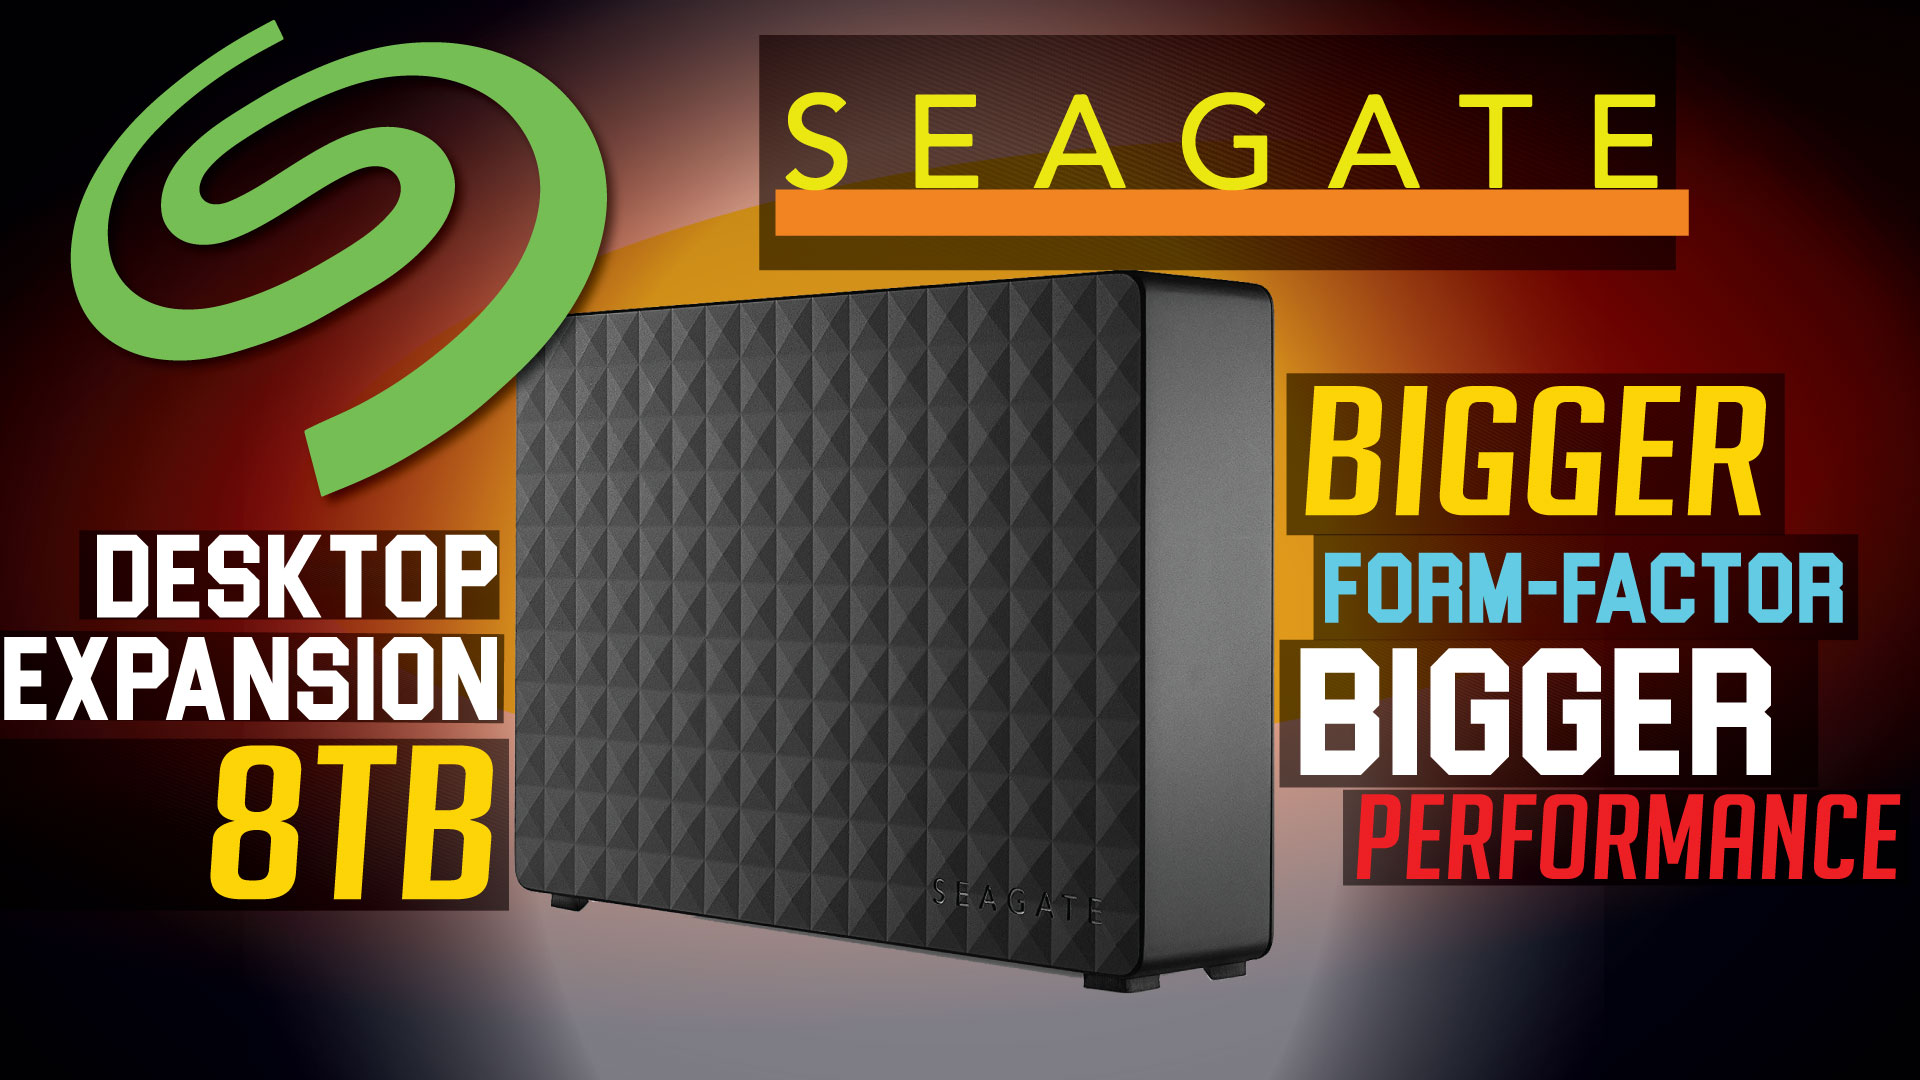 Real Hardware Review Expansion Reviews Seagate Desktop | 8TB